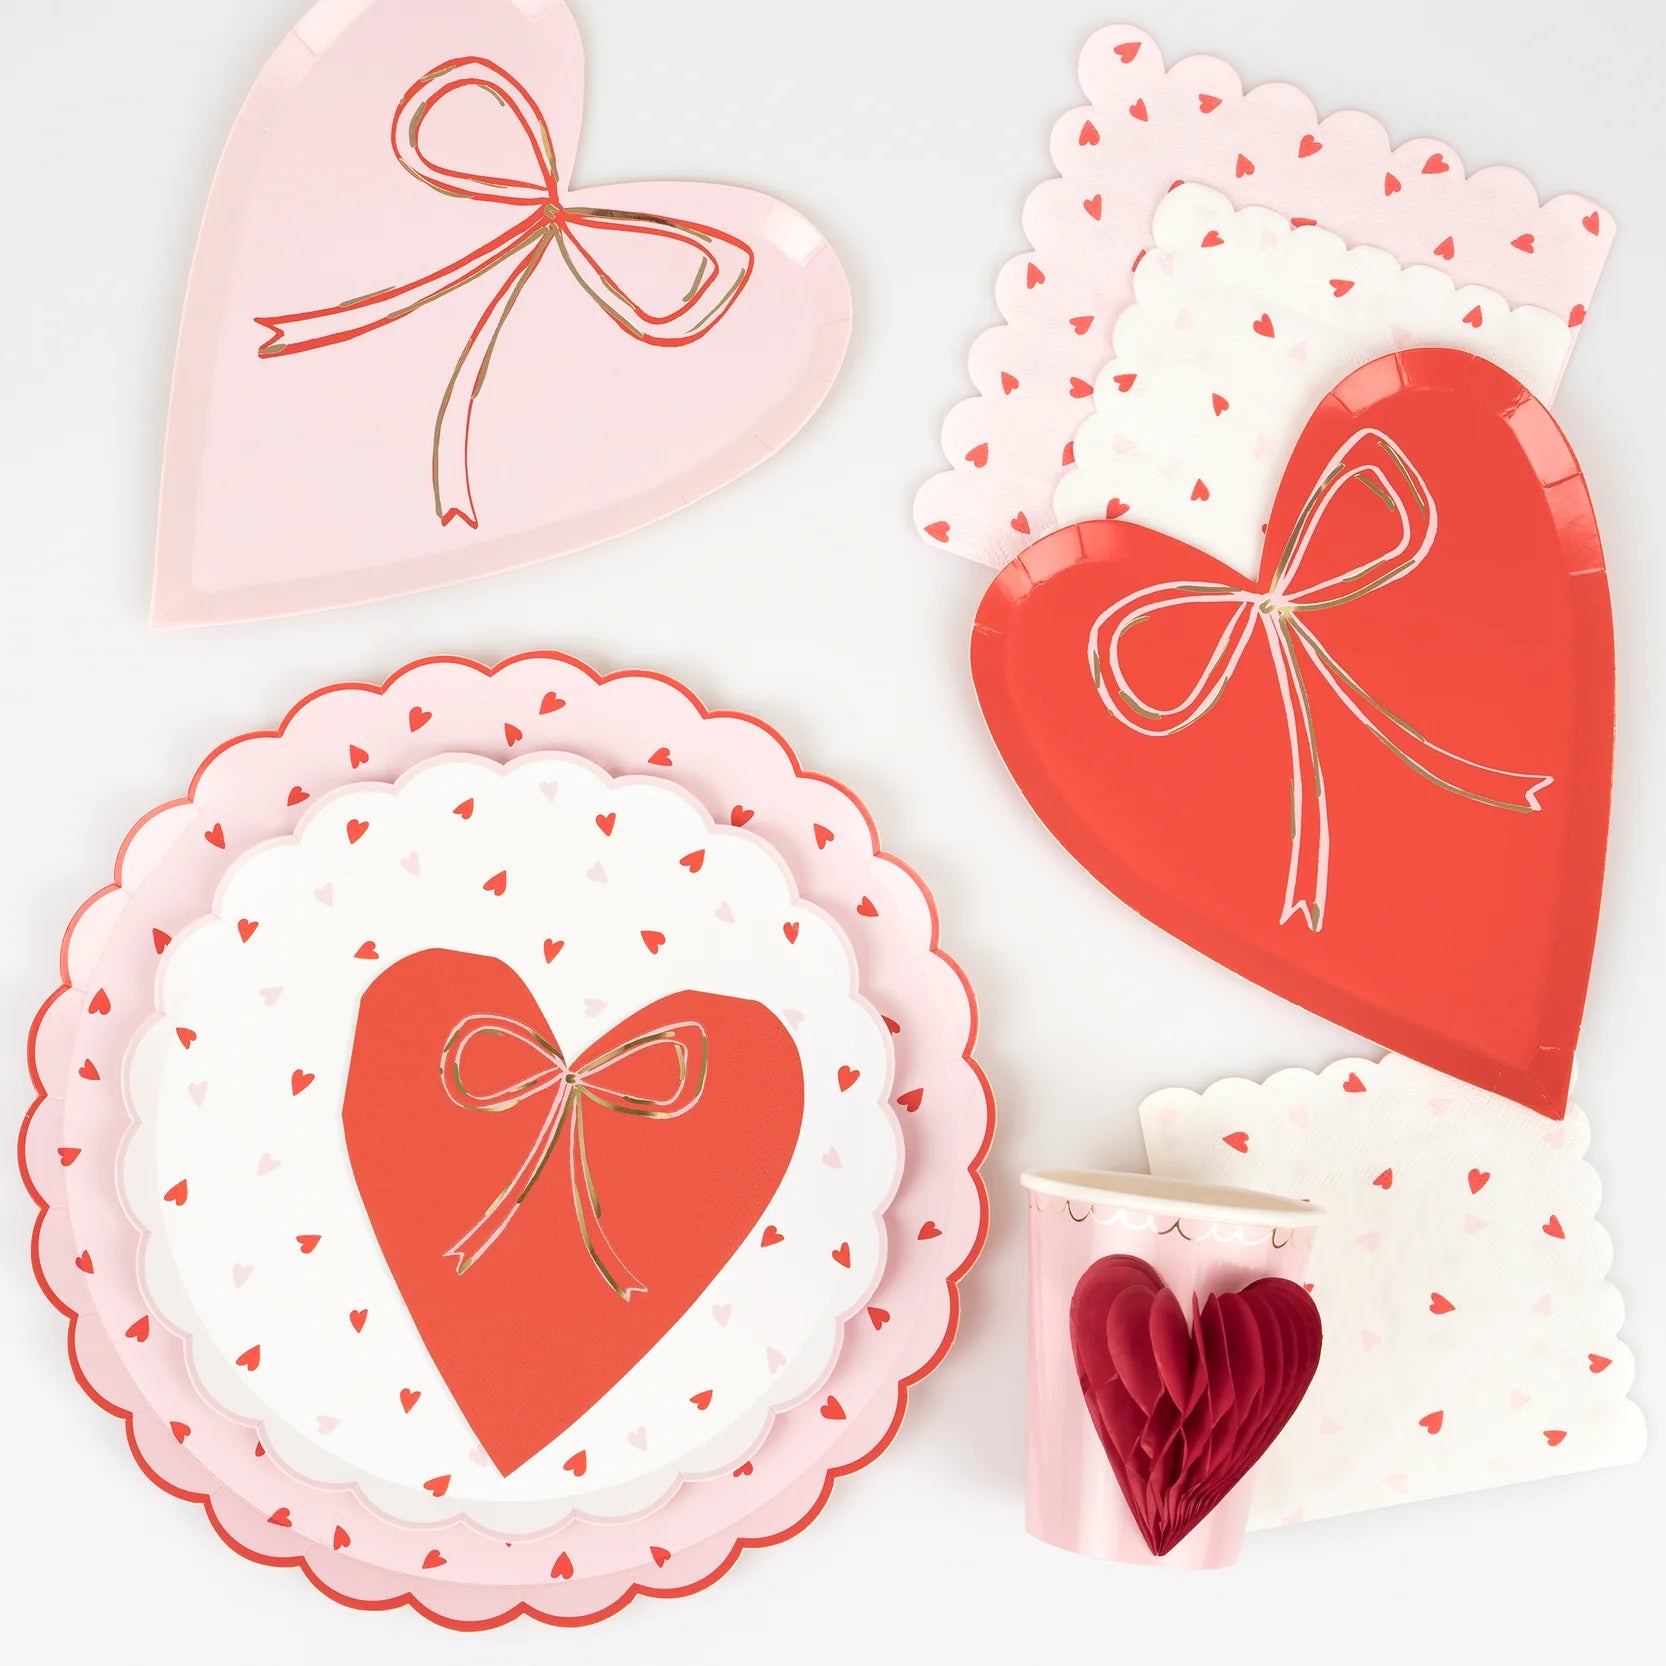 HEART PATTERN LARGE PAPER PLATES